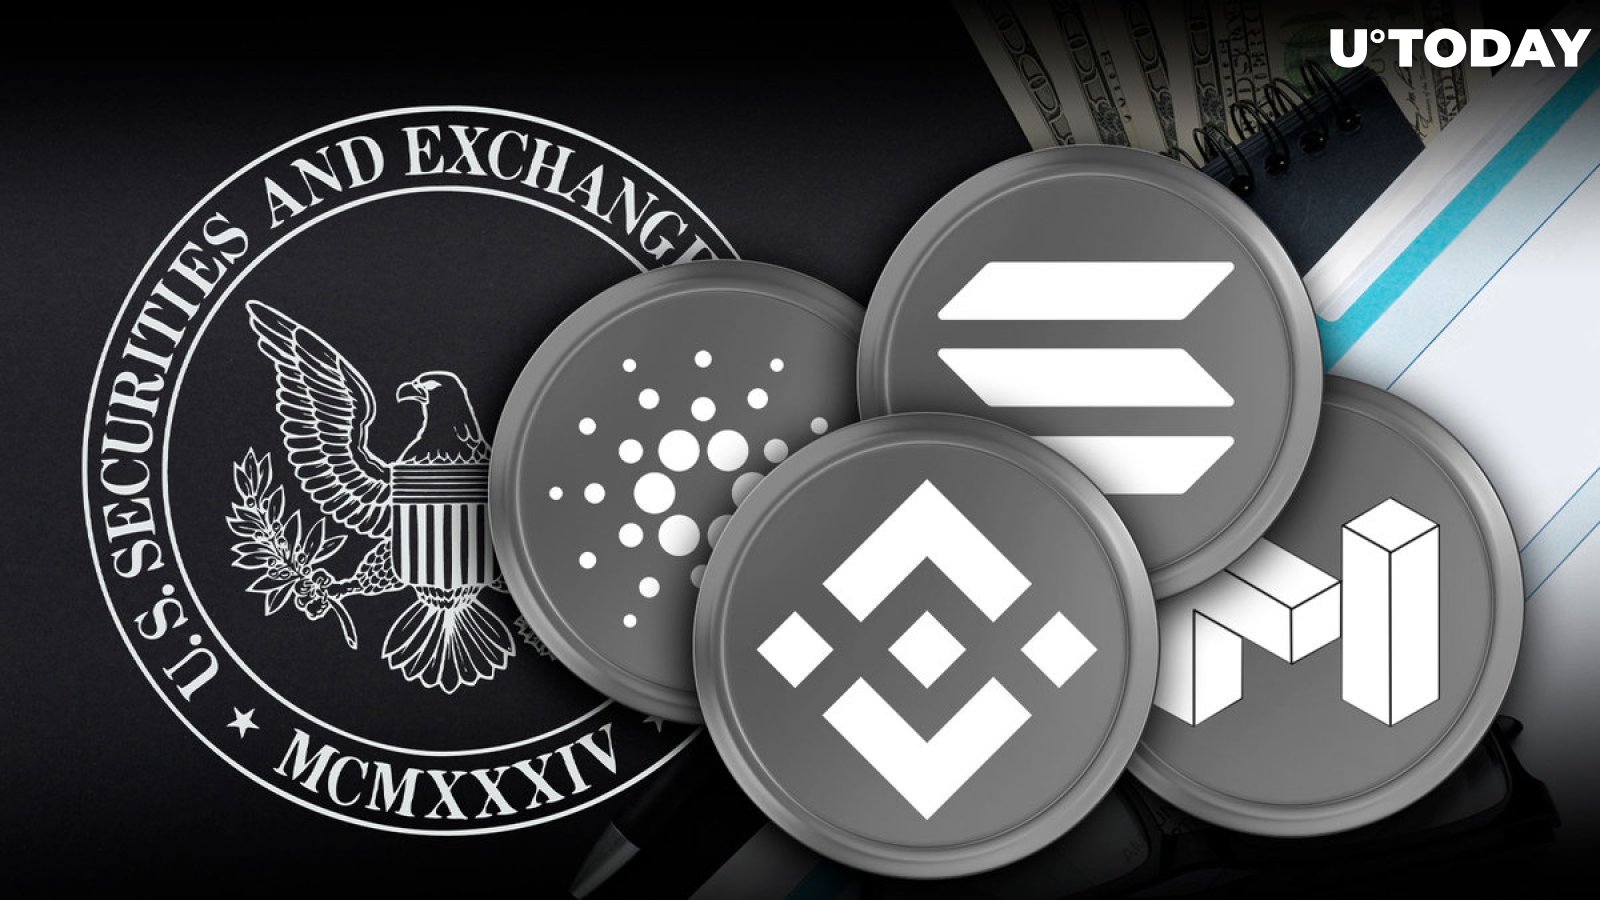 List of 'Crypto Securities' Published by SEC: BNB, ADA, MATIC, SOL and Other Tokens